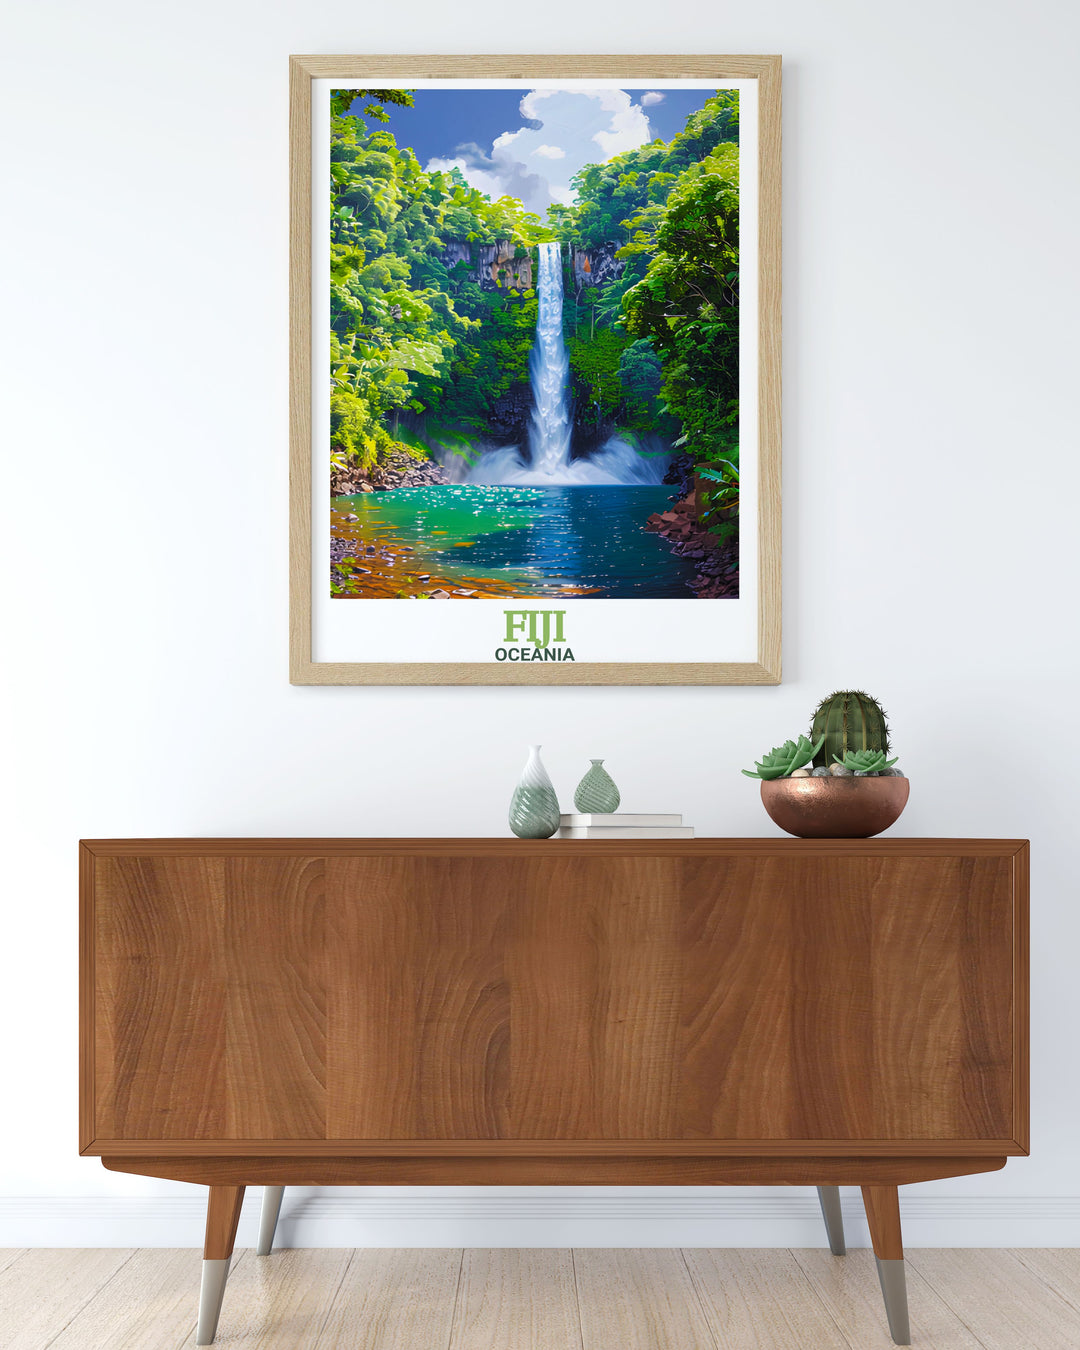 Bouma National Heritage Park travel poster showcasing Fijis lush rainforests and majestic waterfalls perfect for adding a touch of tropical elegance to any space. This Fiji print brings the beauty of Bouma National Heritage Park to your walls.